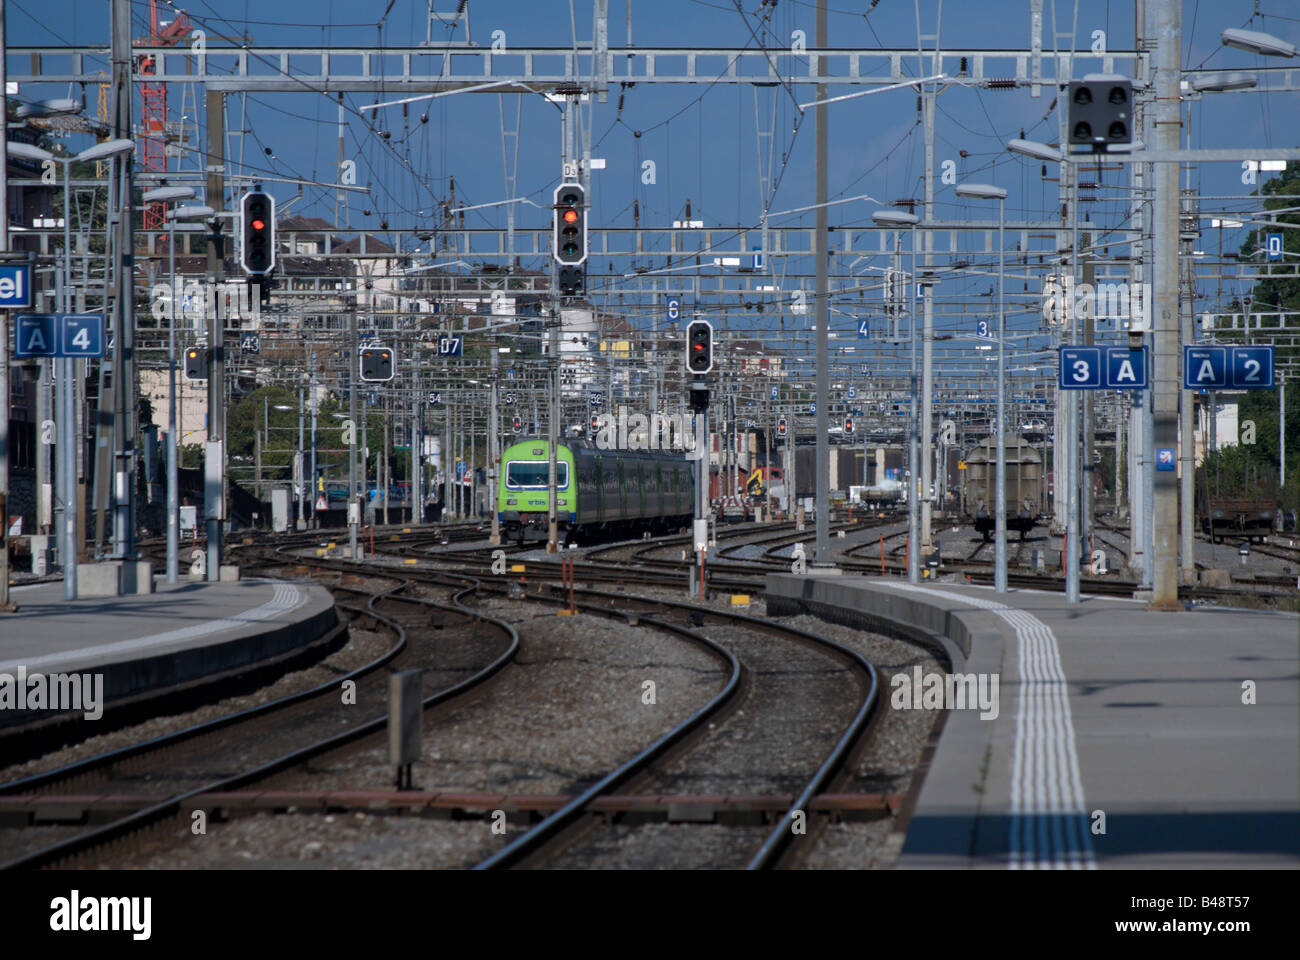 View of the train yard looking north-east from the train station in Neuchatel, Switzerland Stock Photo